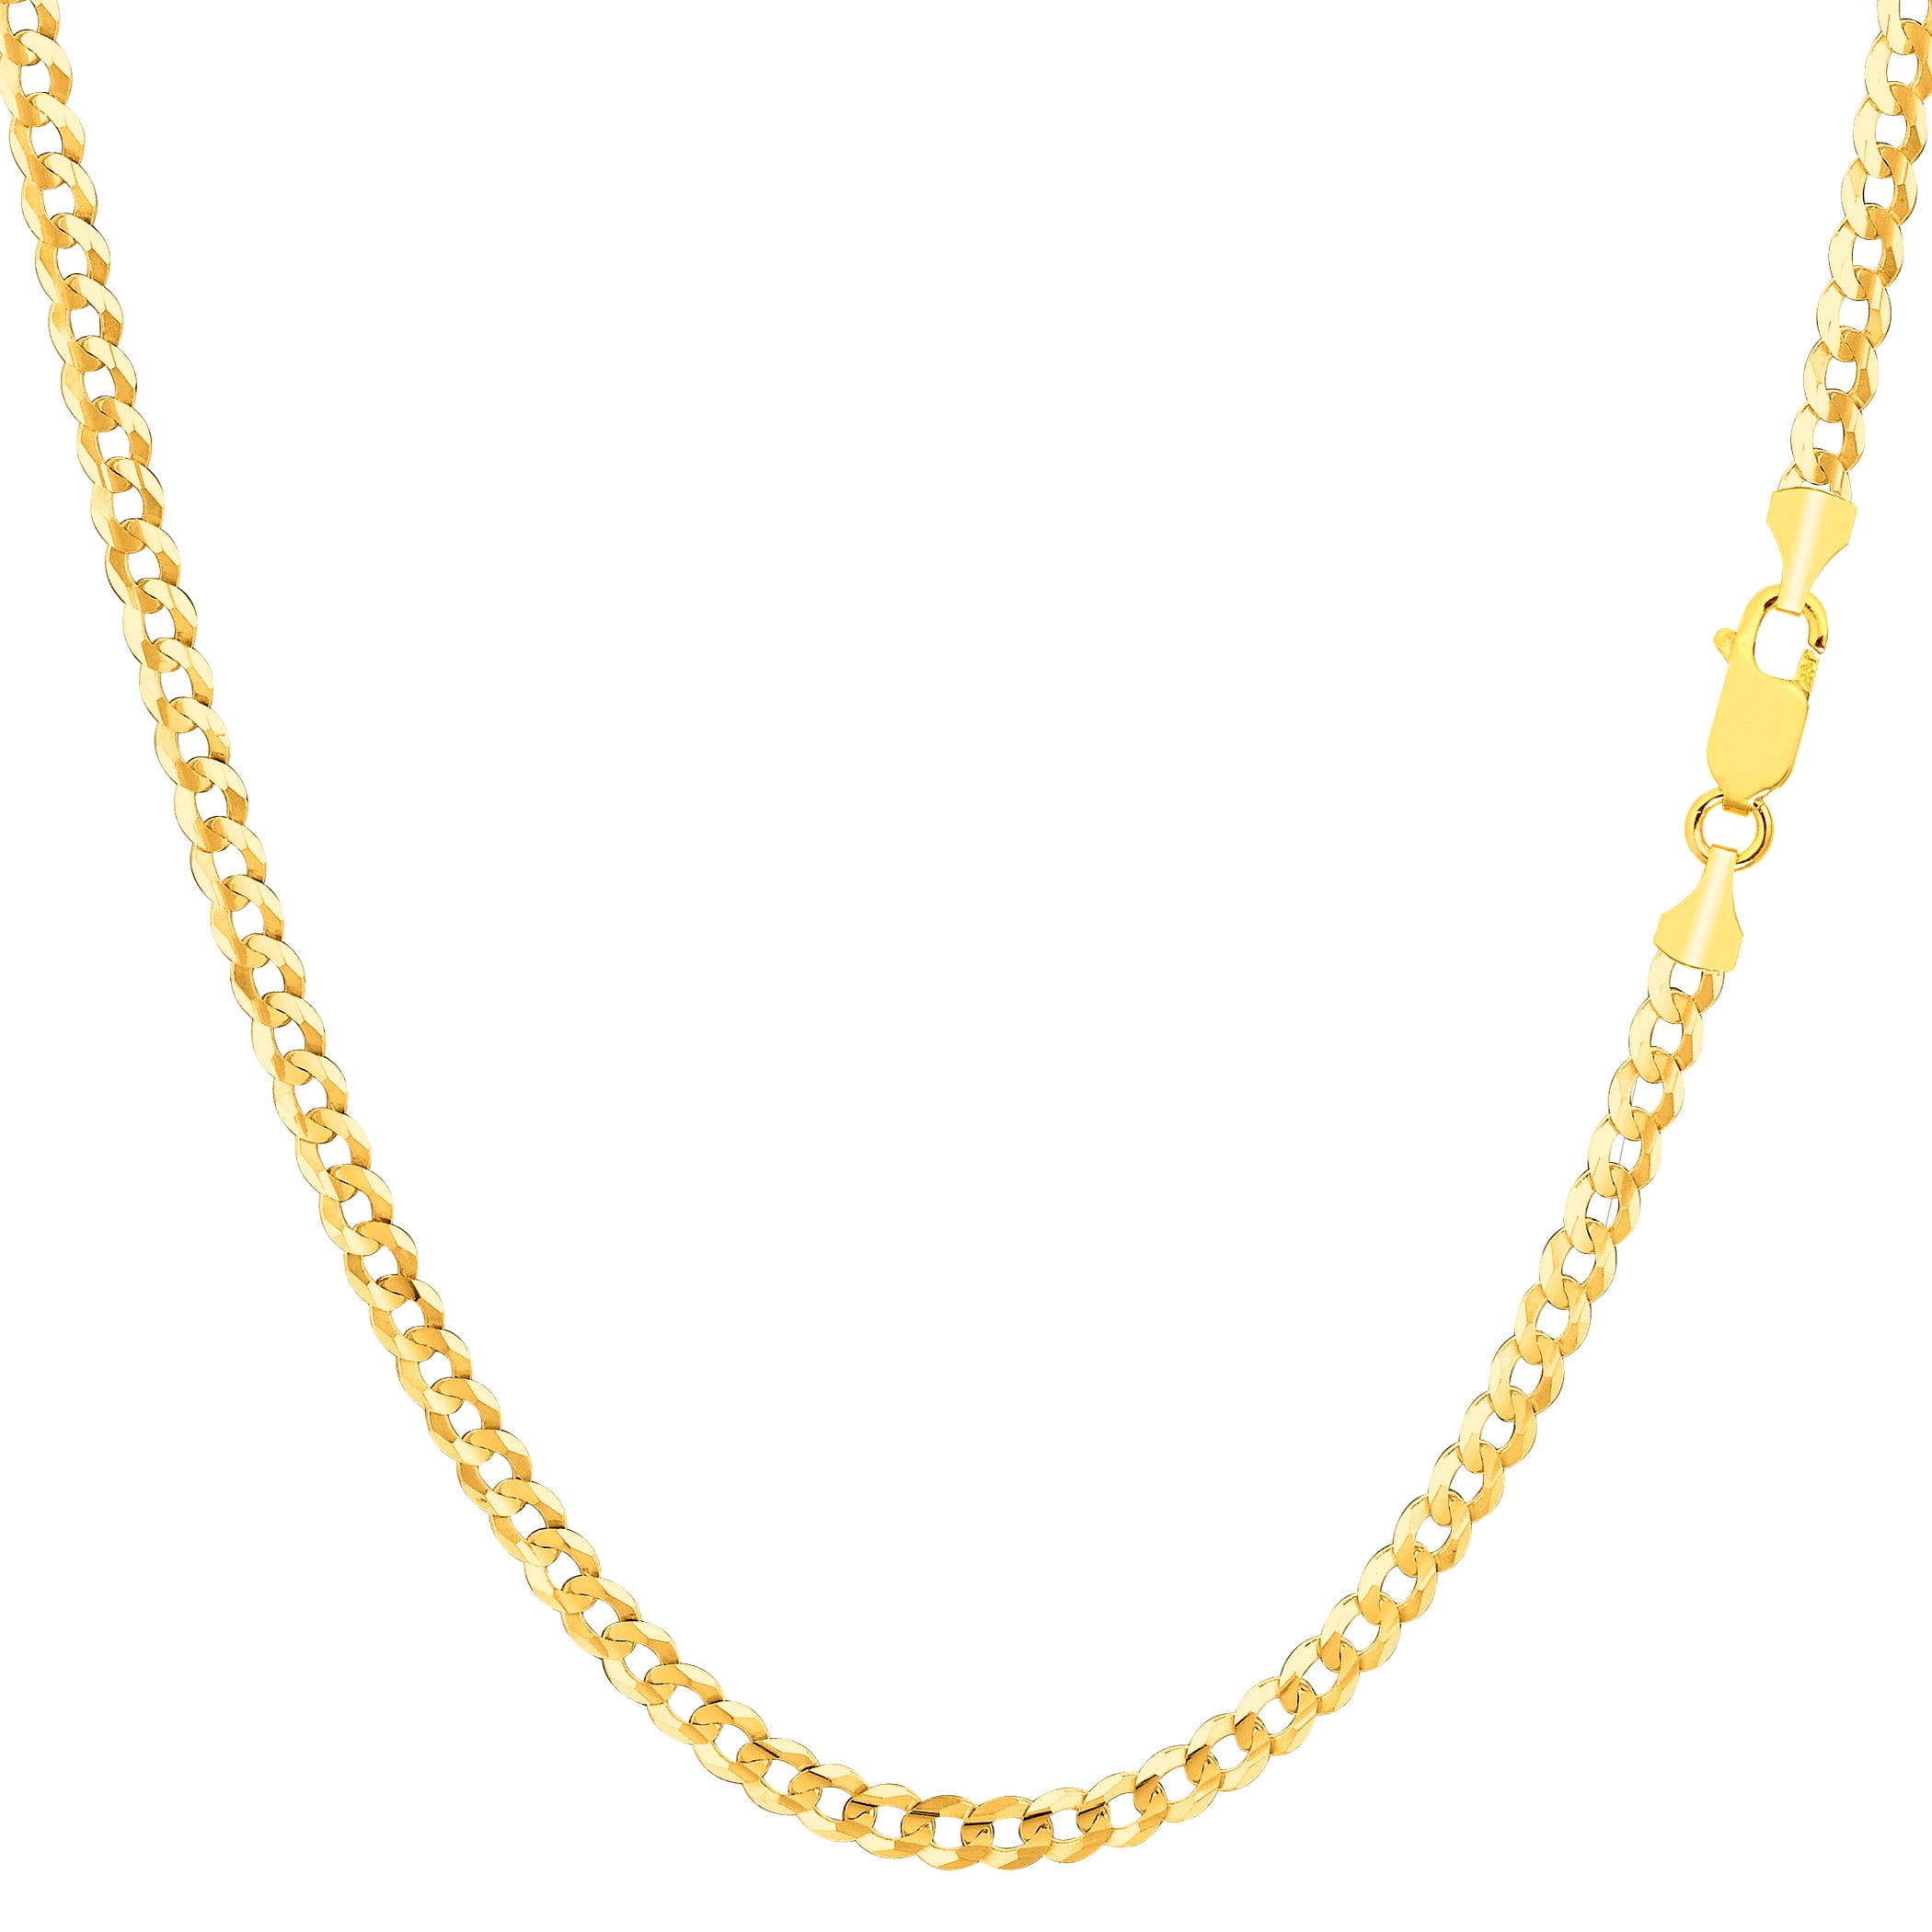 10k Yellow Gold Curb Chain CHOOSE YOUR WIDTH Necklace 